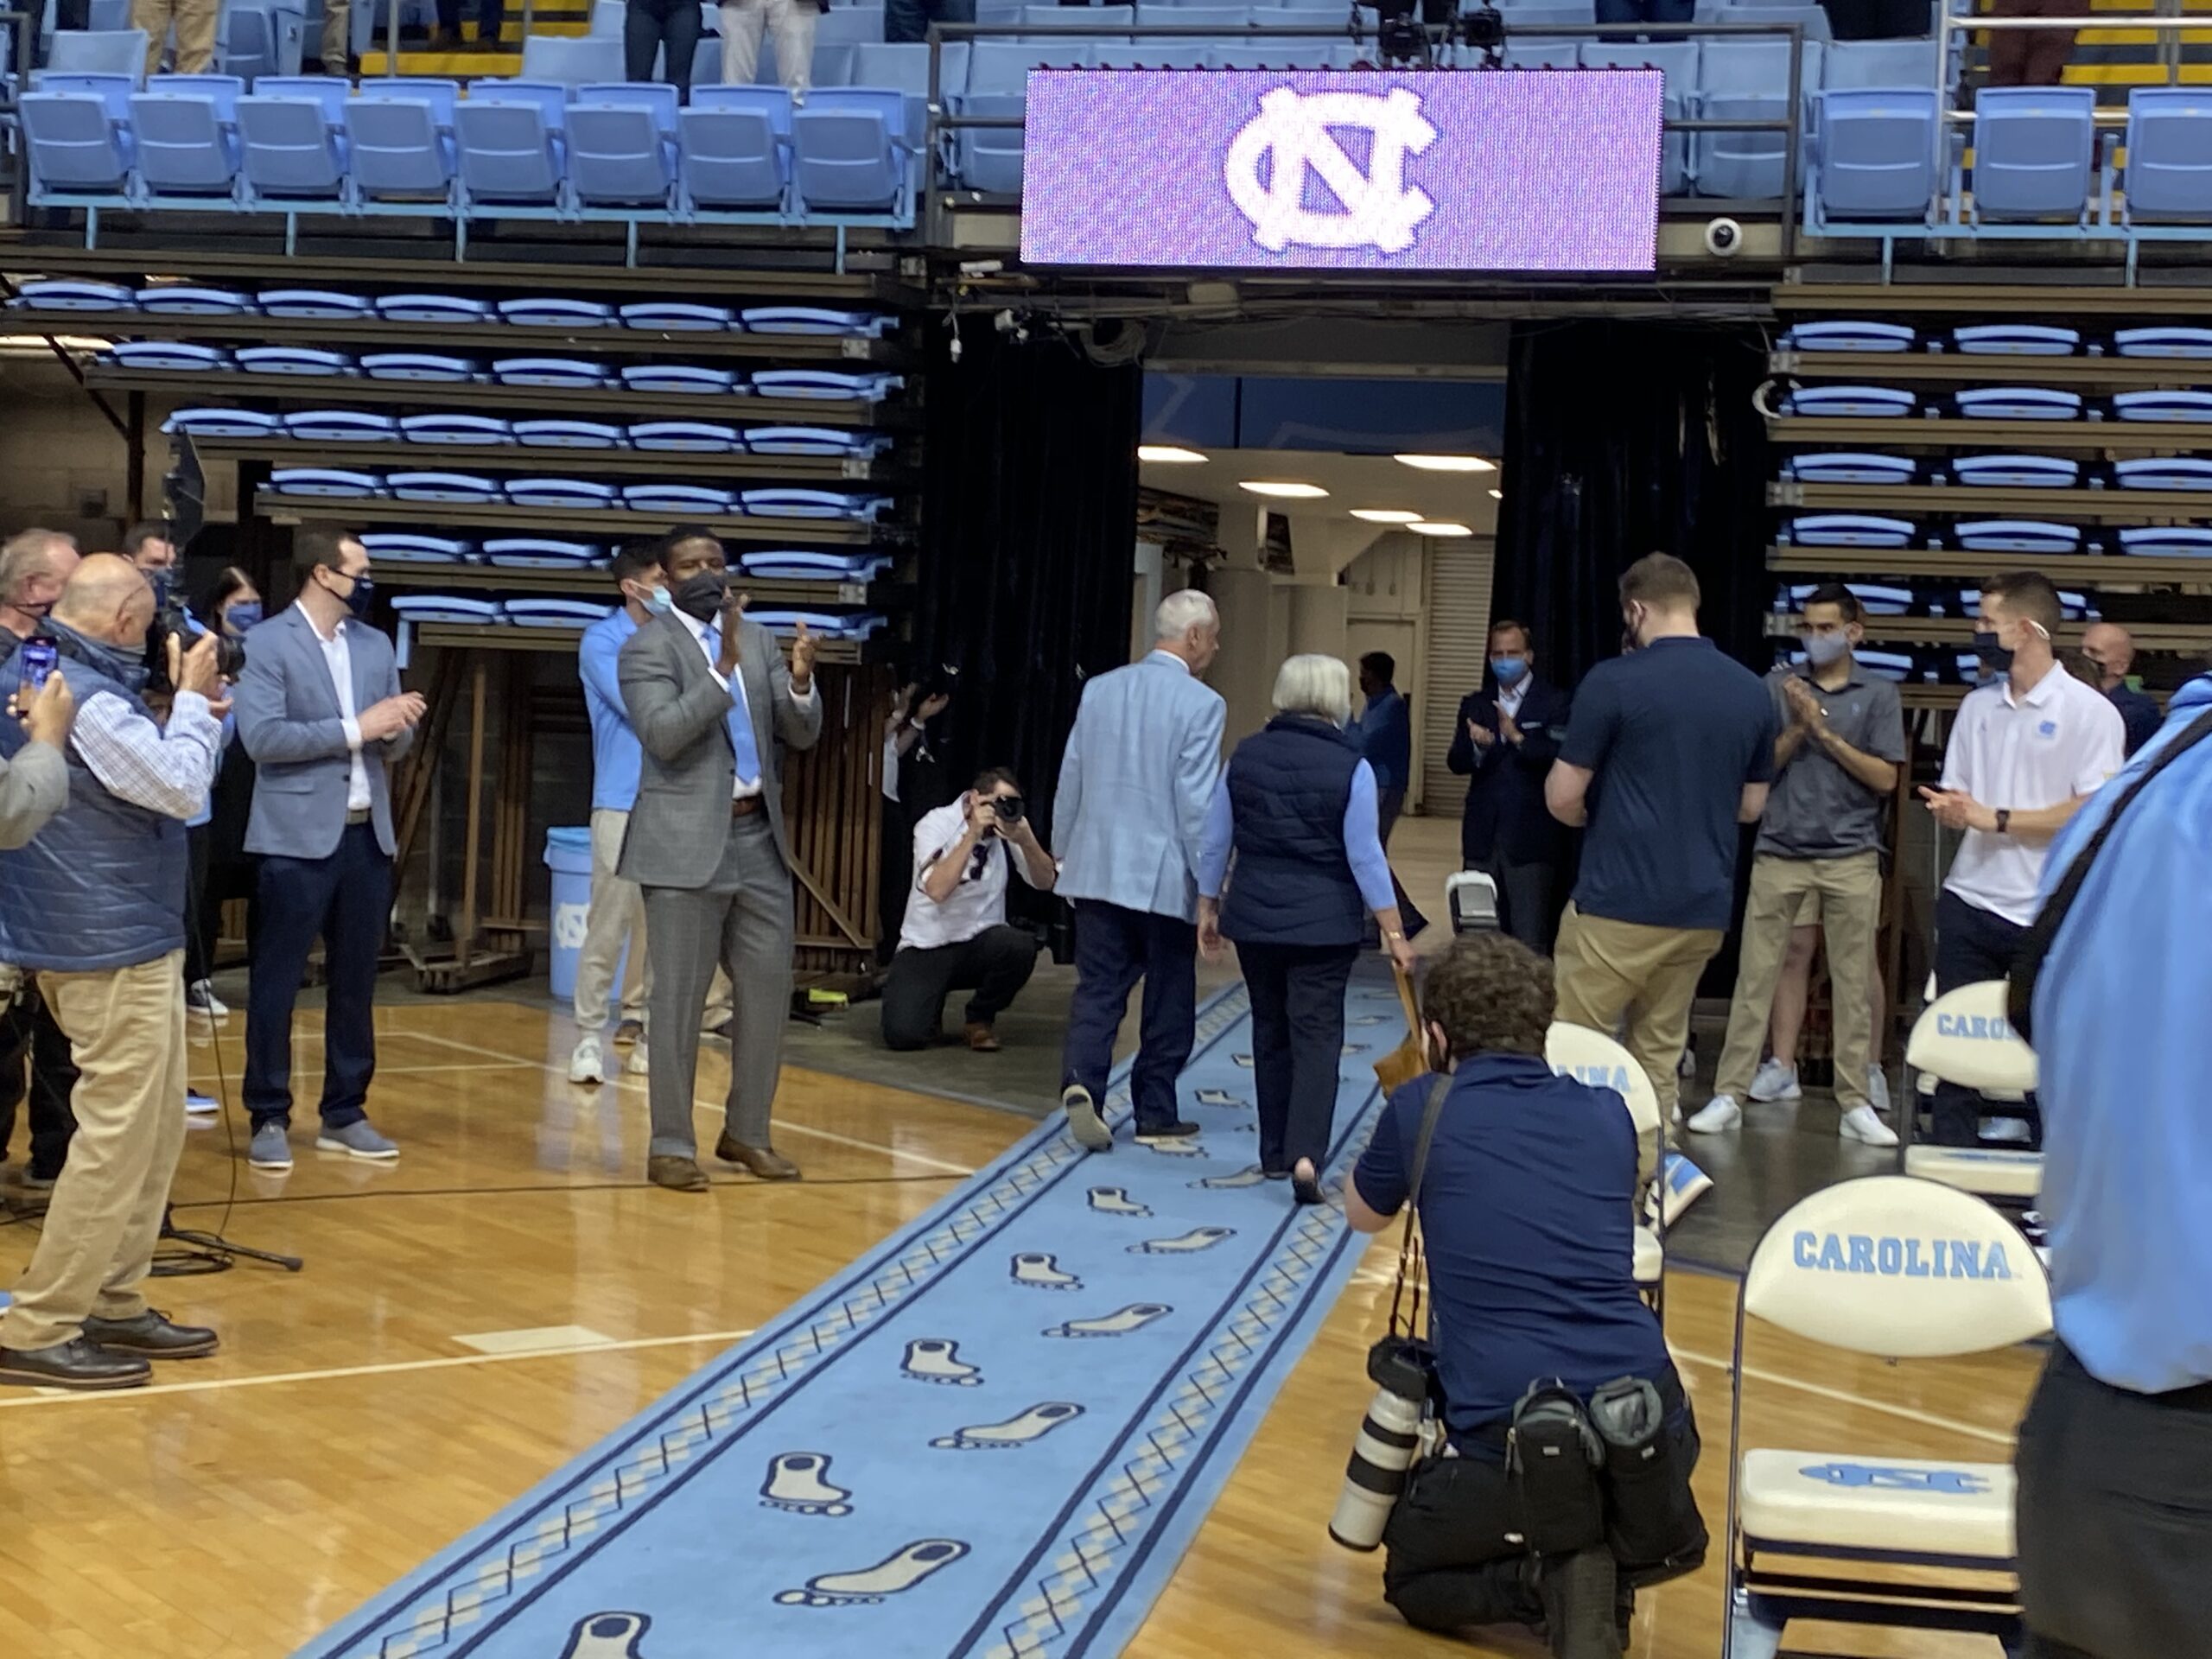 Former players, friends react to ‘end of an era’ of UNC basketball